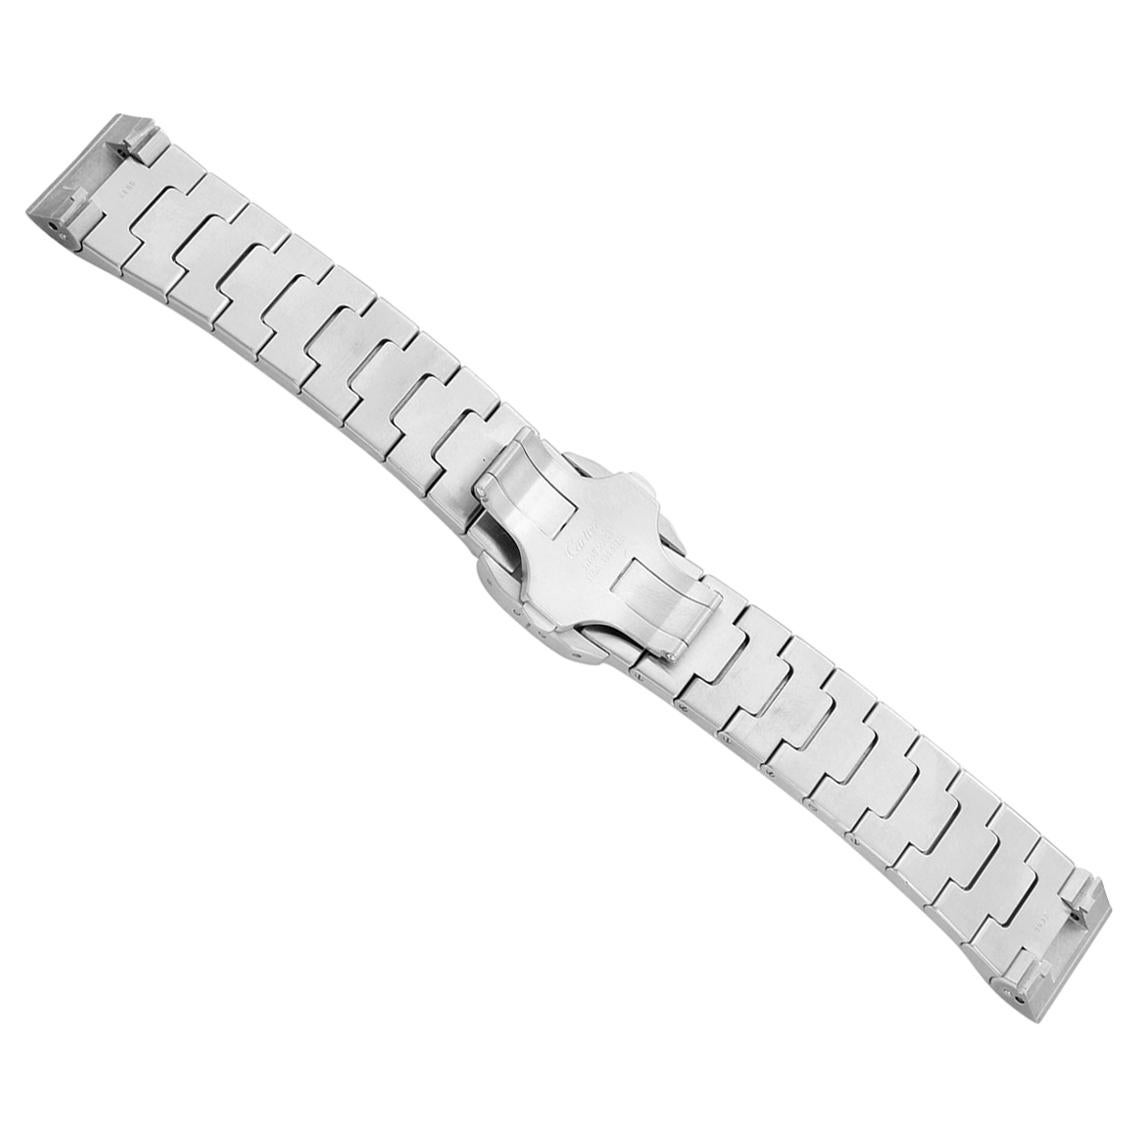 Cartier Santos 100 Bracelet steel 21mm for $949 for sale from a Trusted  Seller on Chrono24